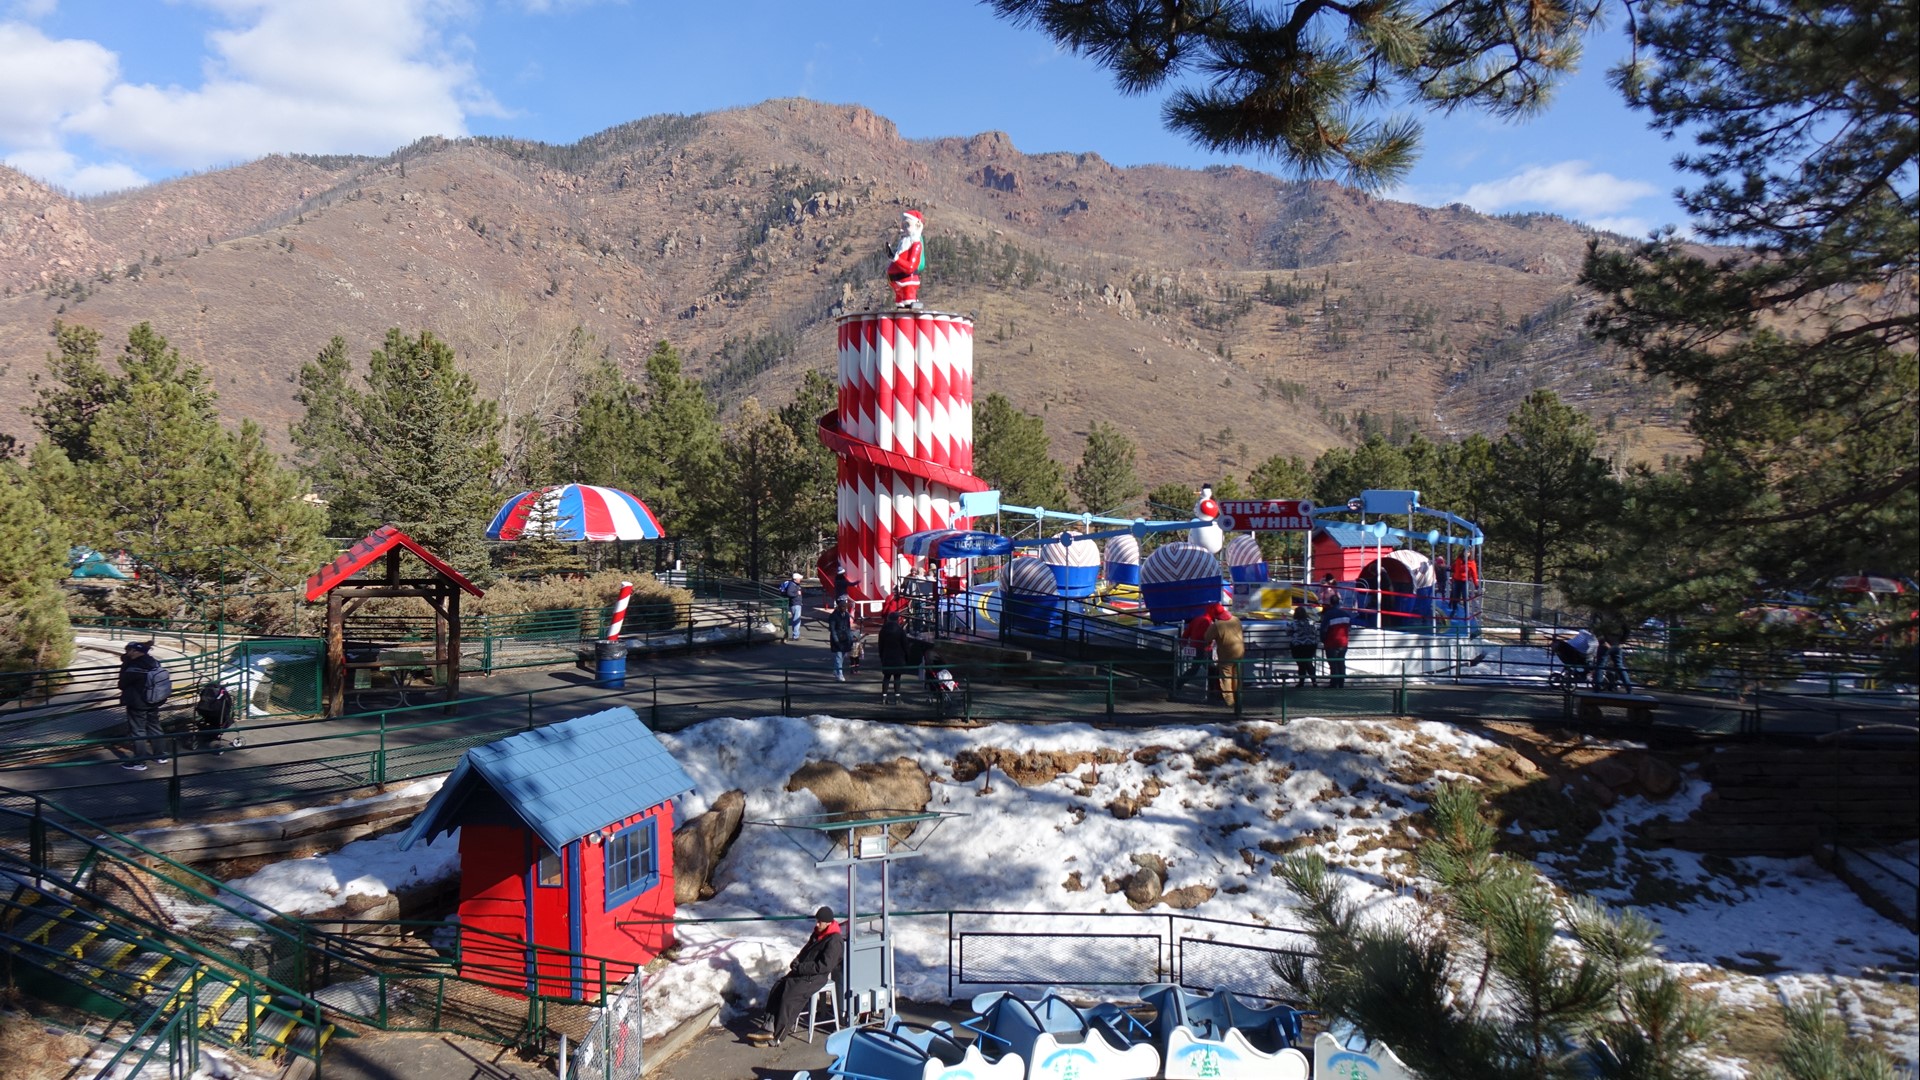 Peeking above the trees at the base of Pikes Peak is a Christmas-themed amusement park and village that has been attracting families for more than 60 years.